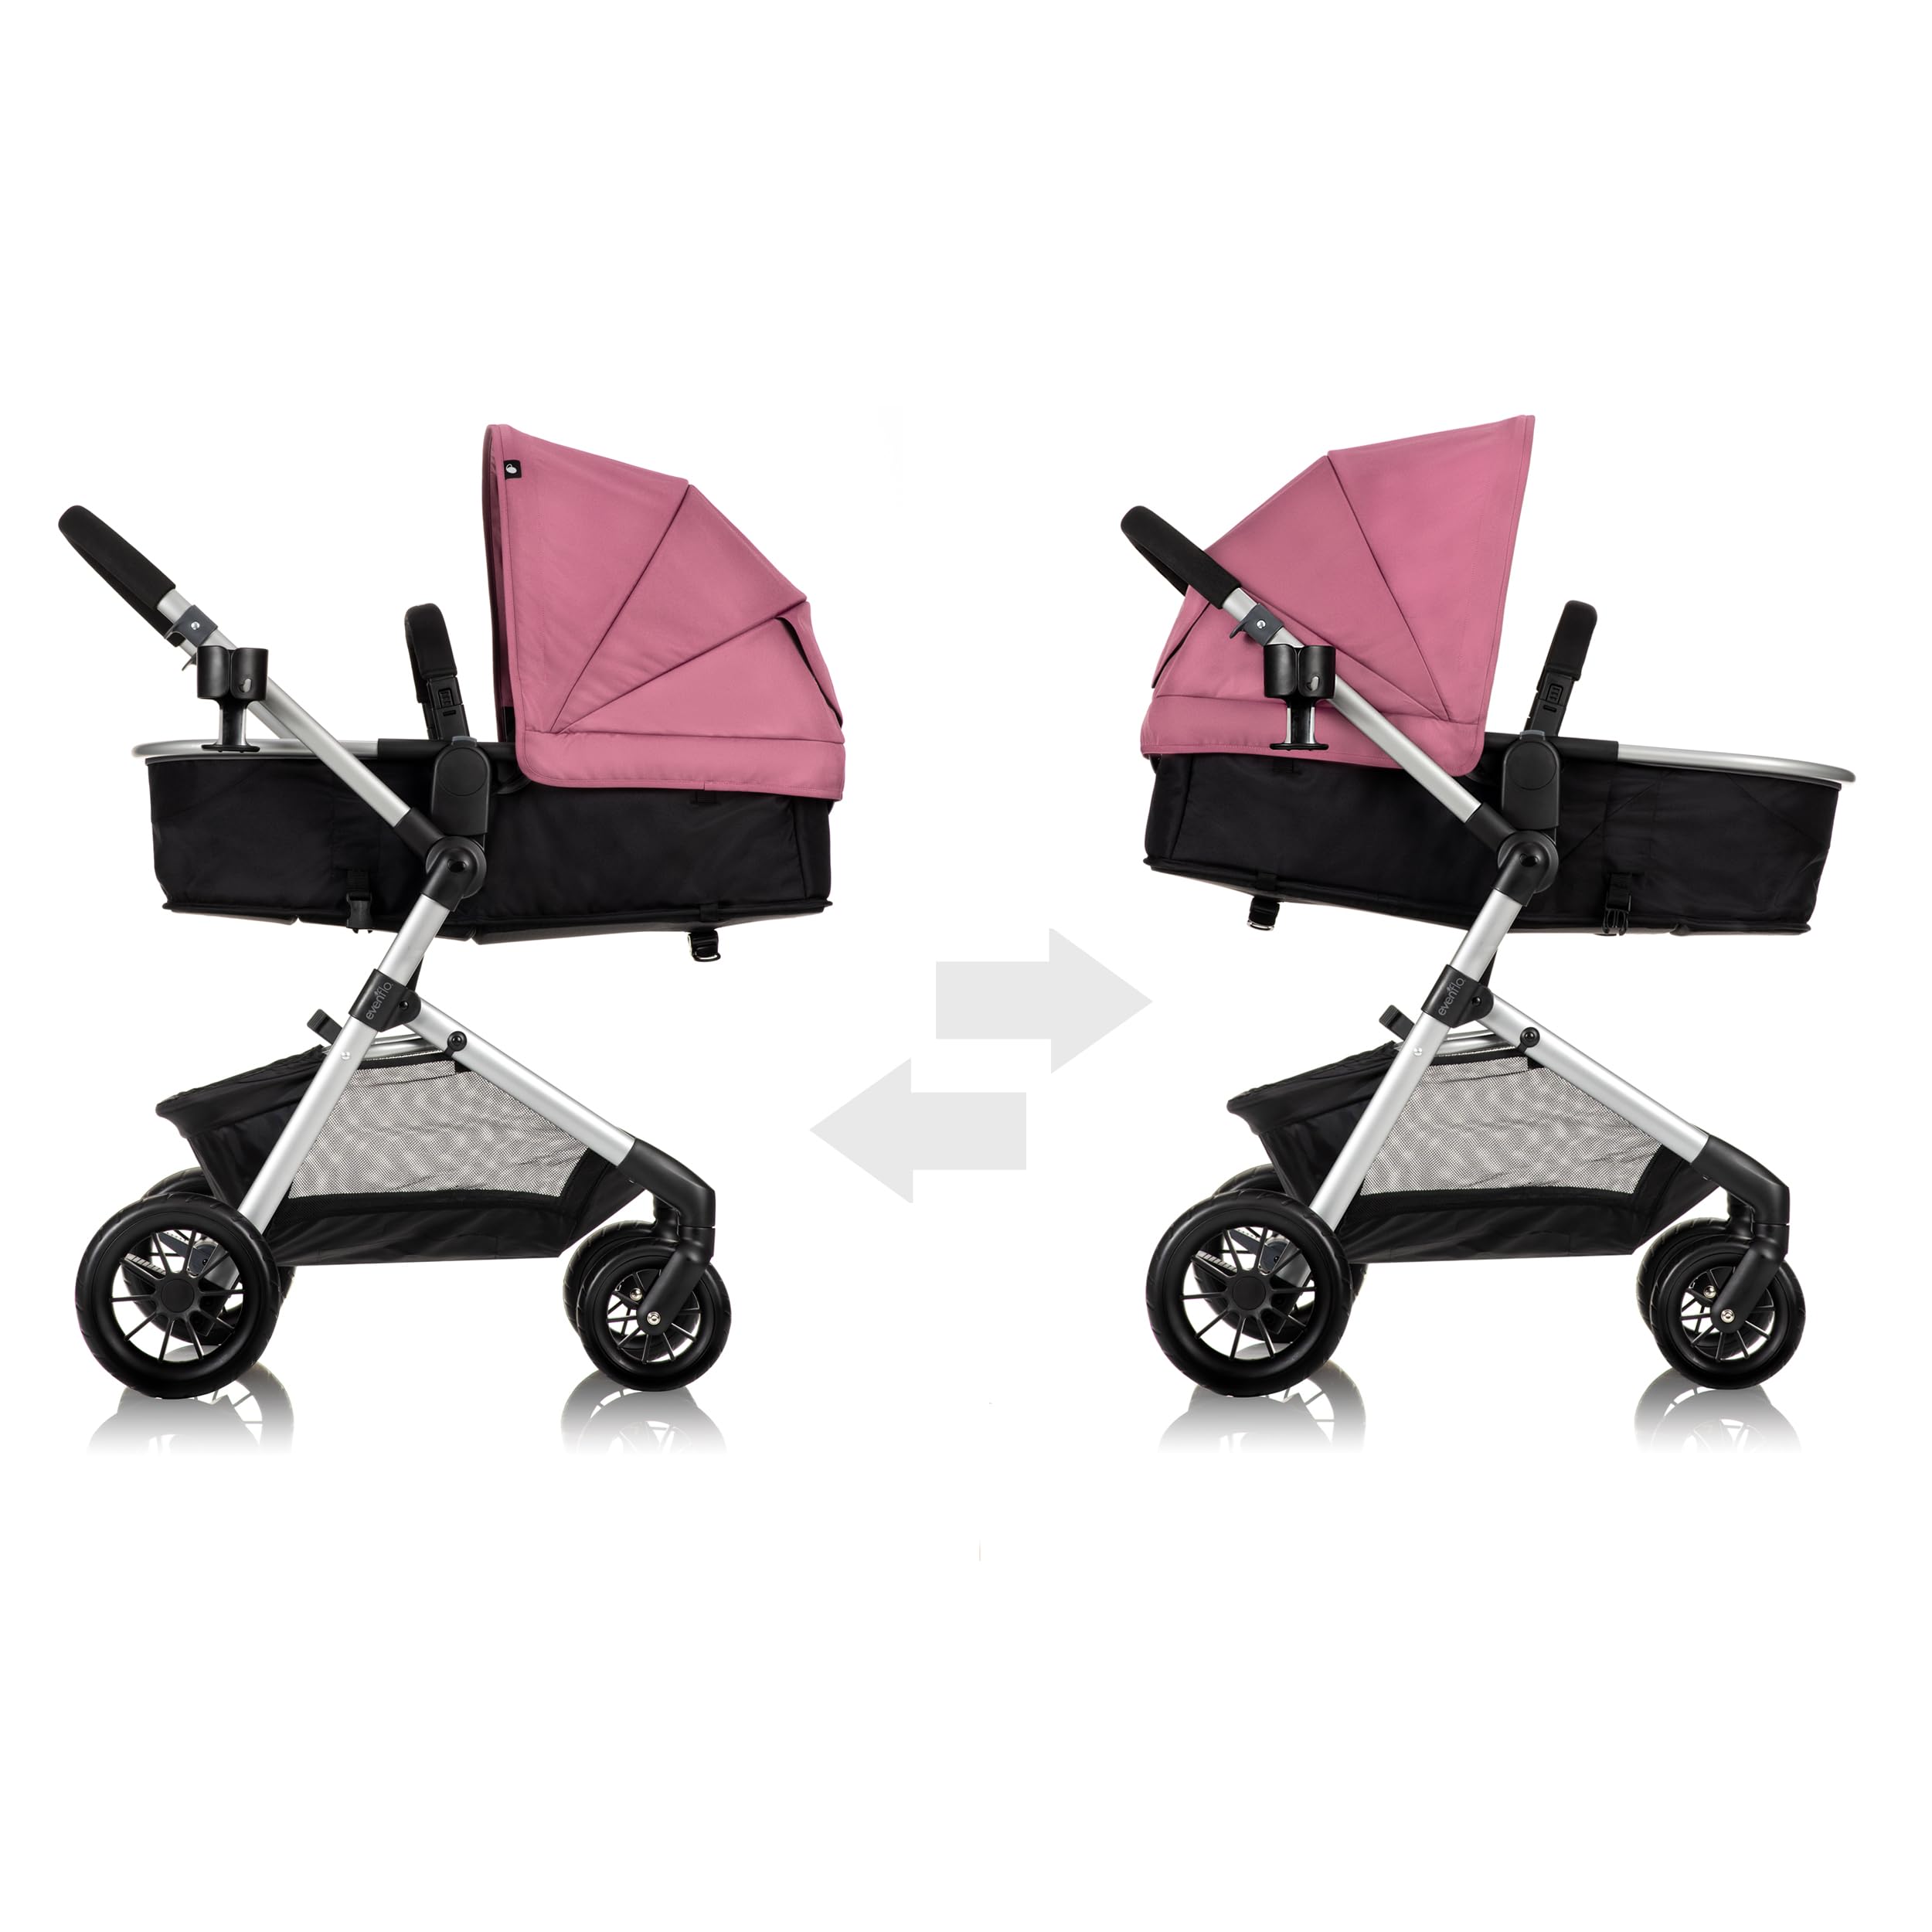 Evenflo Pivot Modular Travel System with LiteMax Infant Car Seat with Anti-Rebound Bar (Dusty Rose Pink)